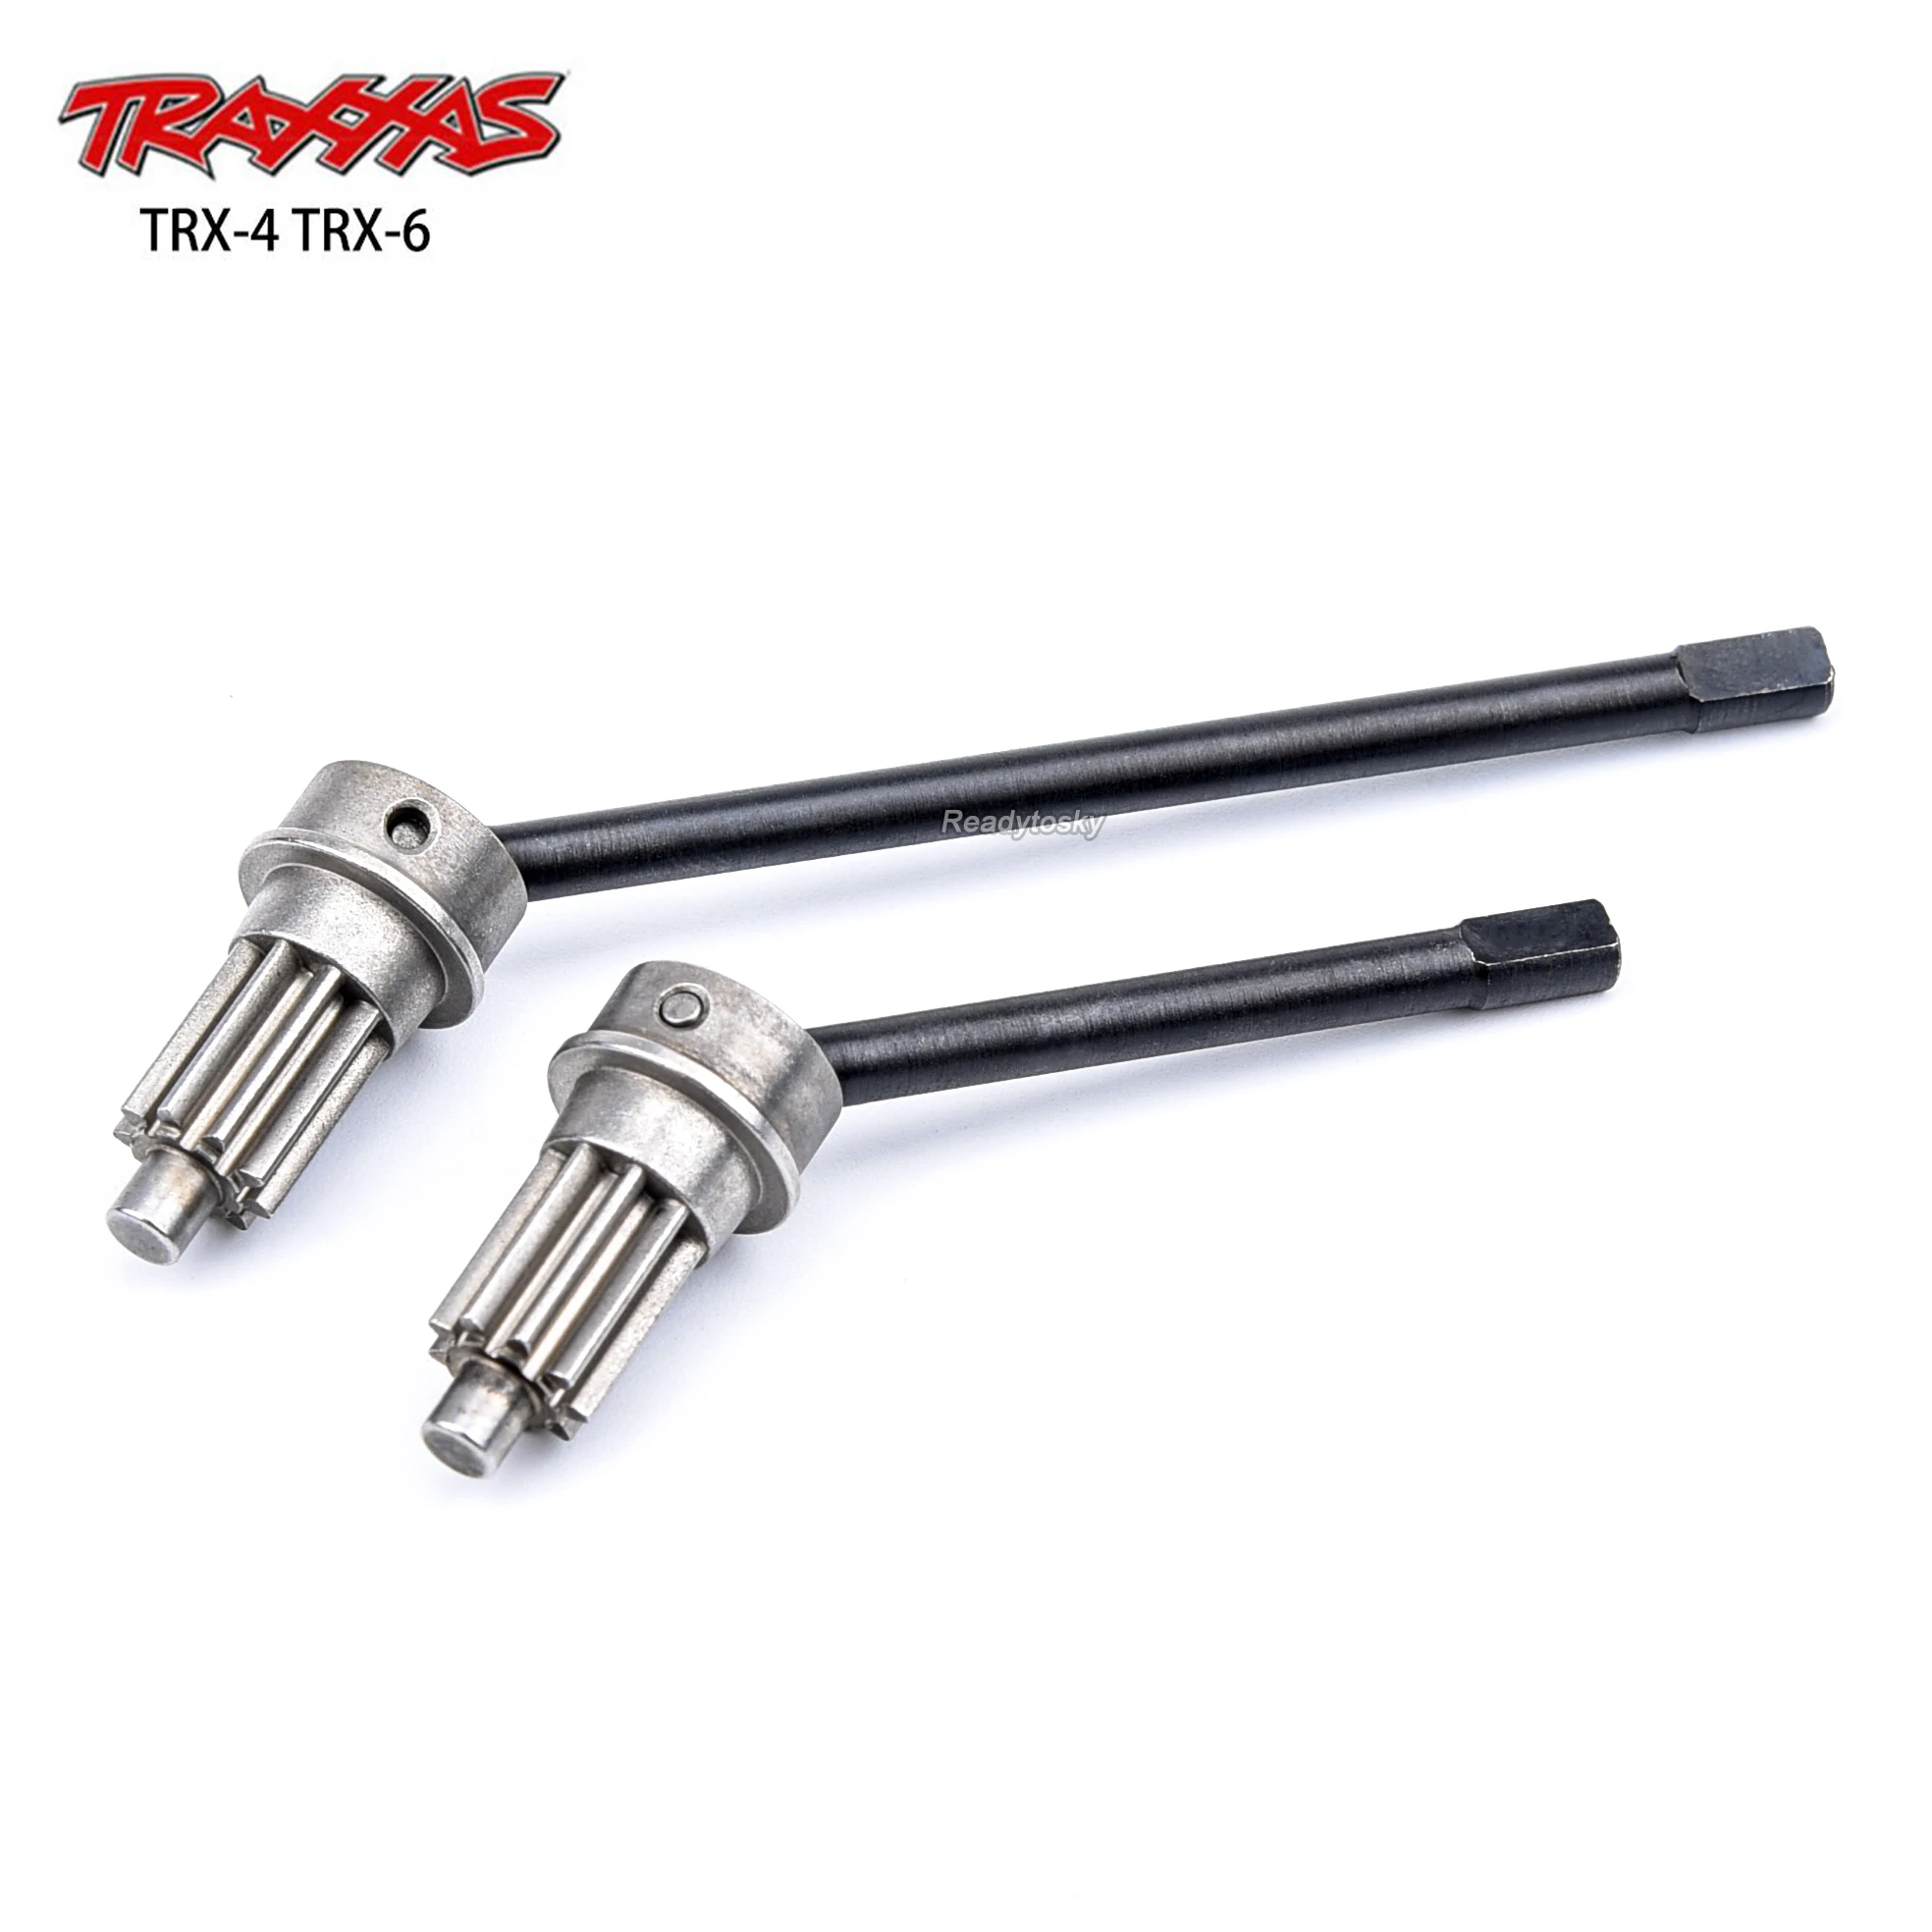 

2pcs/set 1:10 Stainless Steel Front Axle CVD Drive Shaft Shafts 93.5mm/67mm For 1/10 RC TRX4 Car